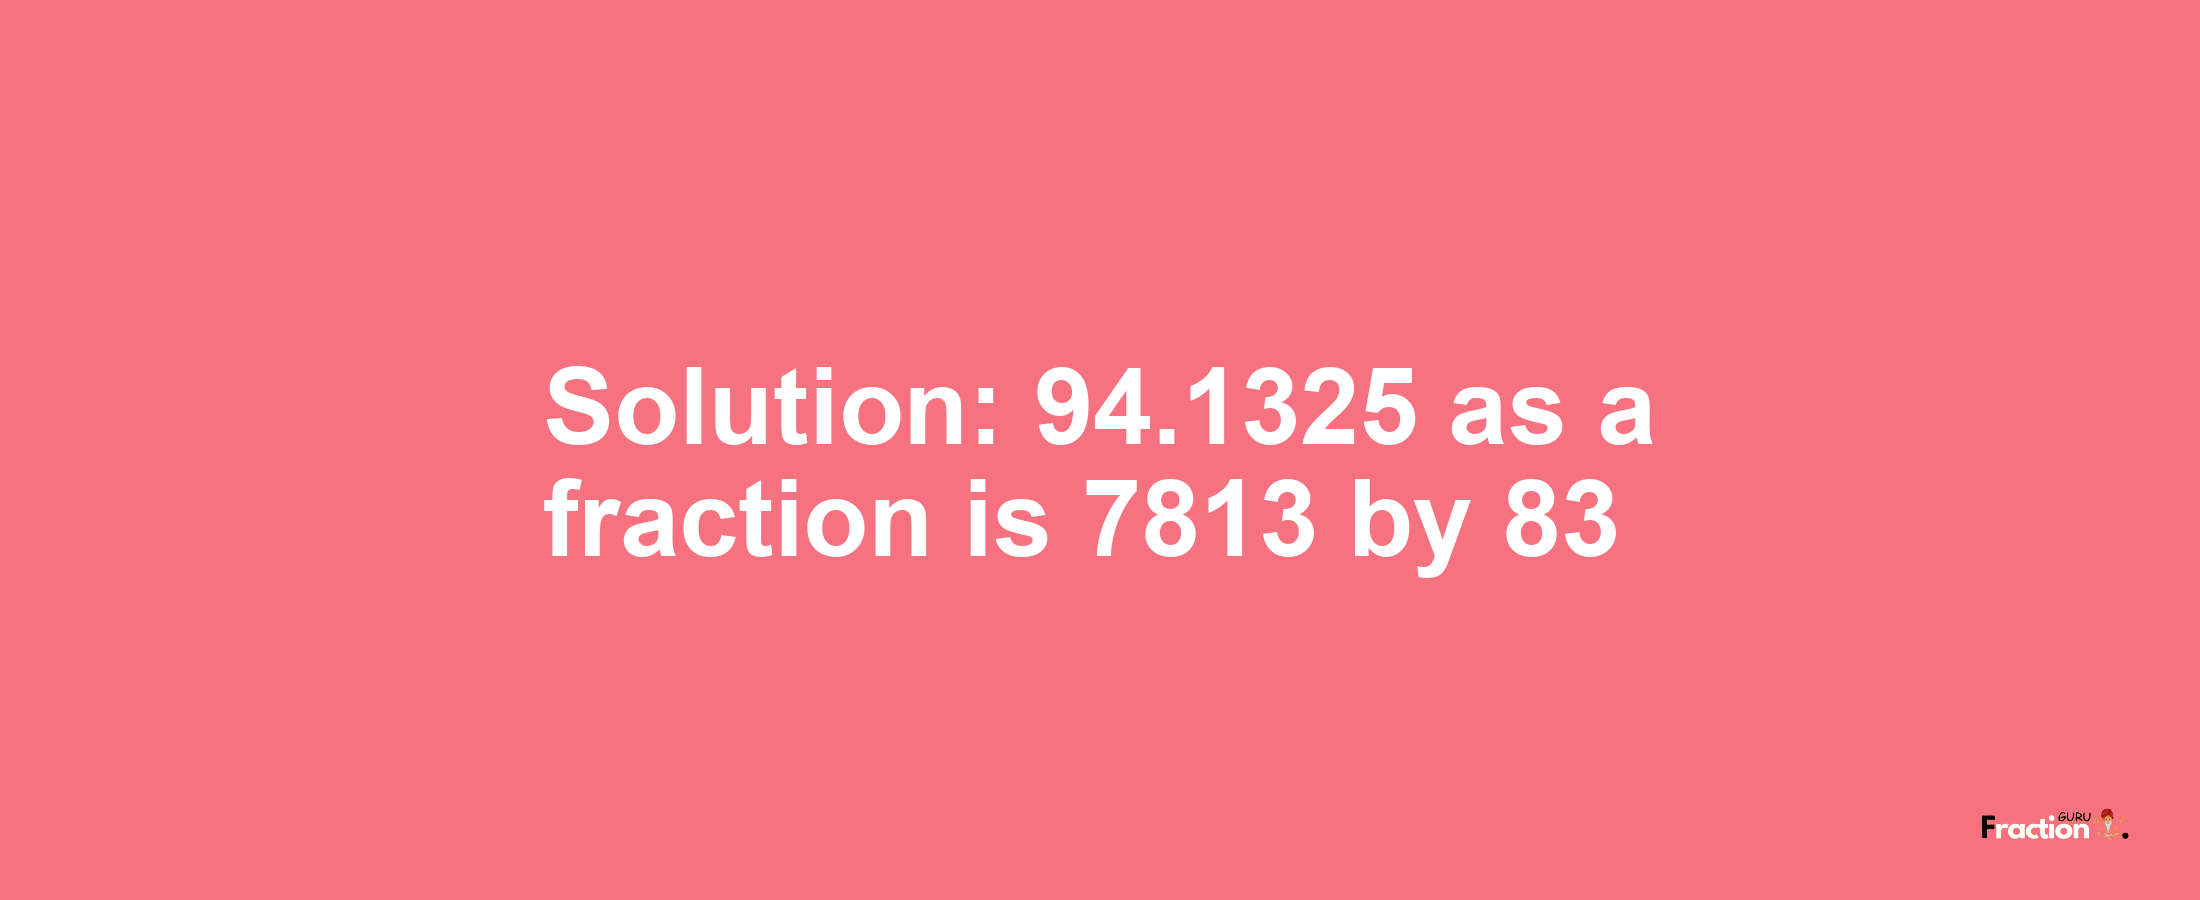 Solution:94.1325 as a fraction is 7813/83